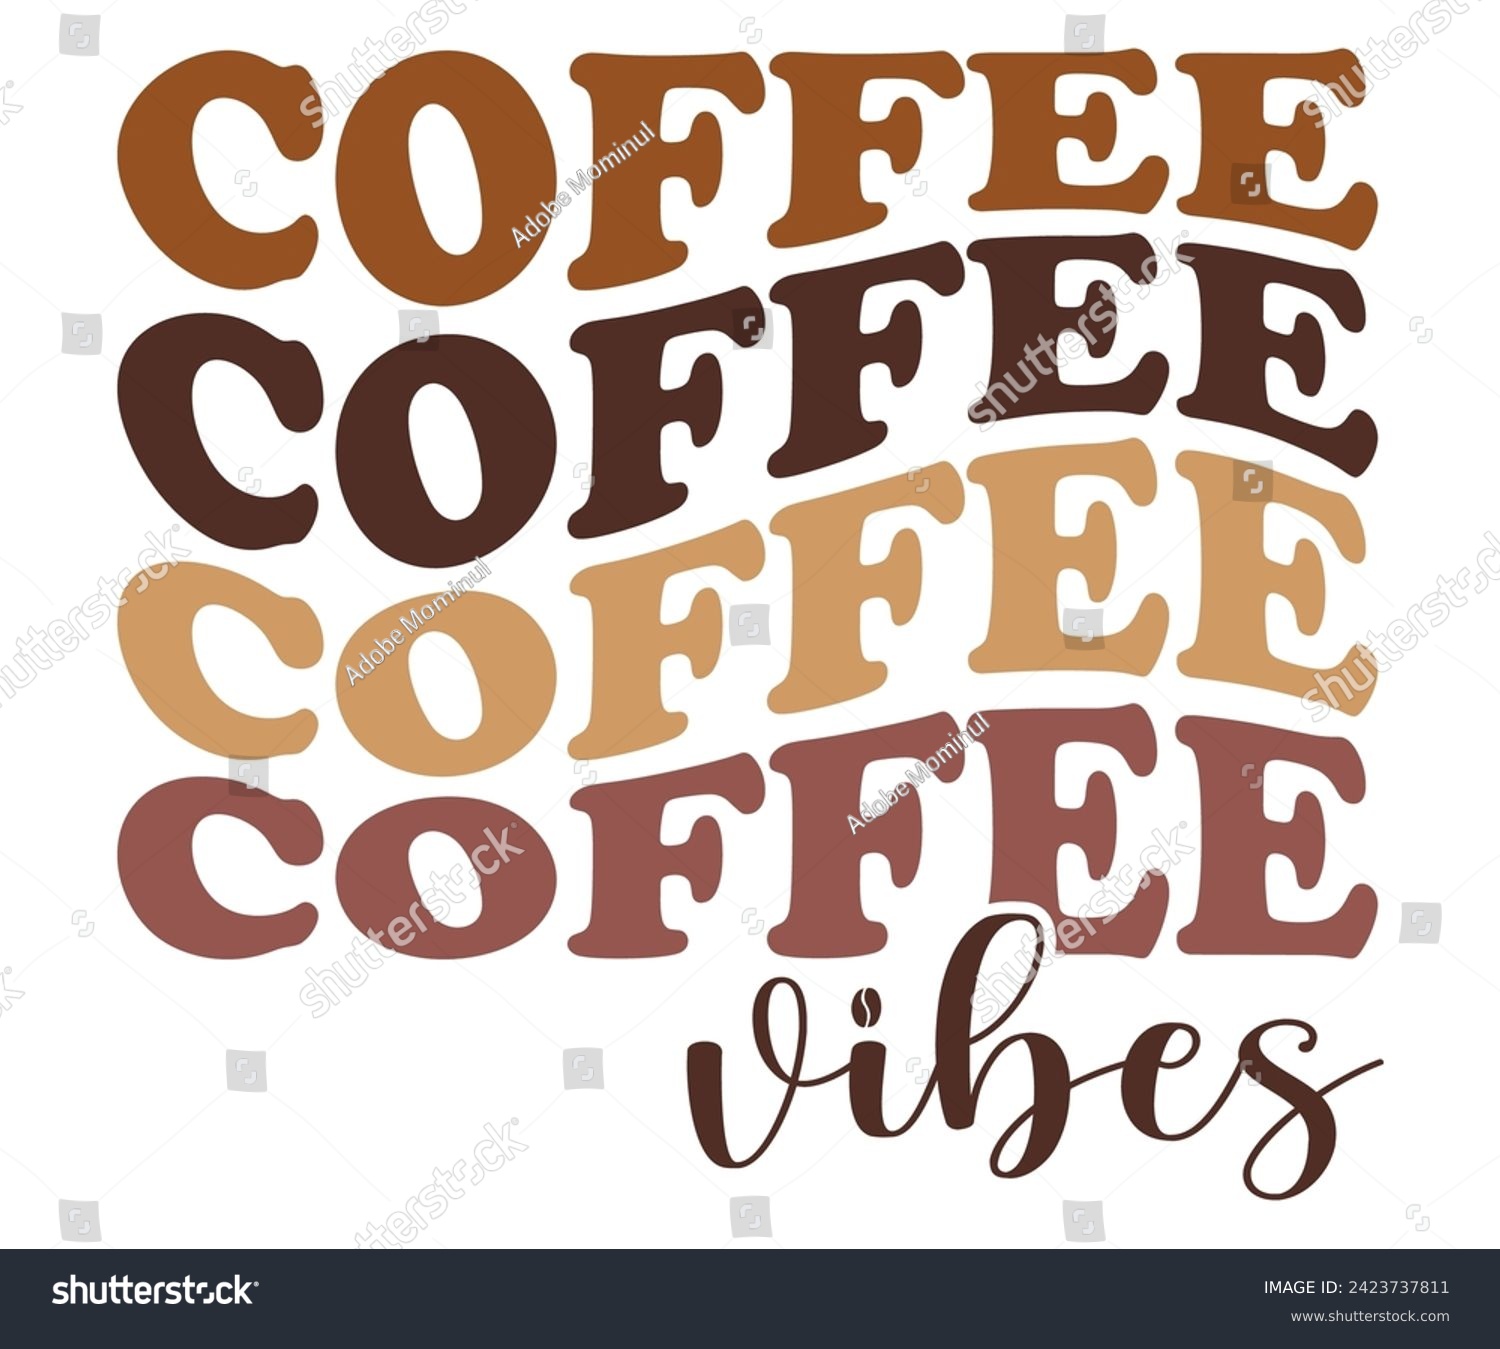 SVG of Coffee Vibes Svg,Coffee Svg,Coffee Retro,Funny Coffee Sayings,Coffee Mug Svg,Coffee Cup Svg,Gift For Coffee,Coffee Lover,Caffeine Svg,Svg Cut File,Coffee Quotes,Sublimation Design, svg